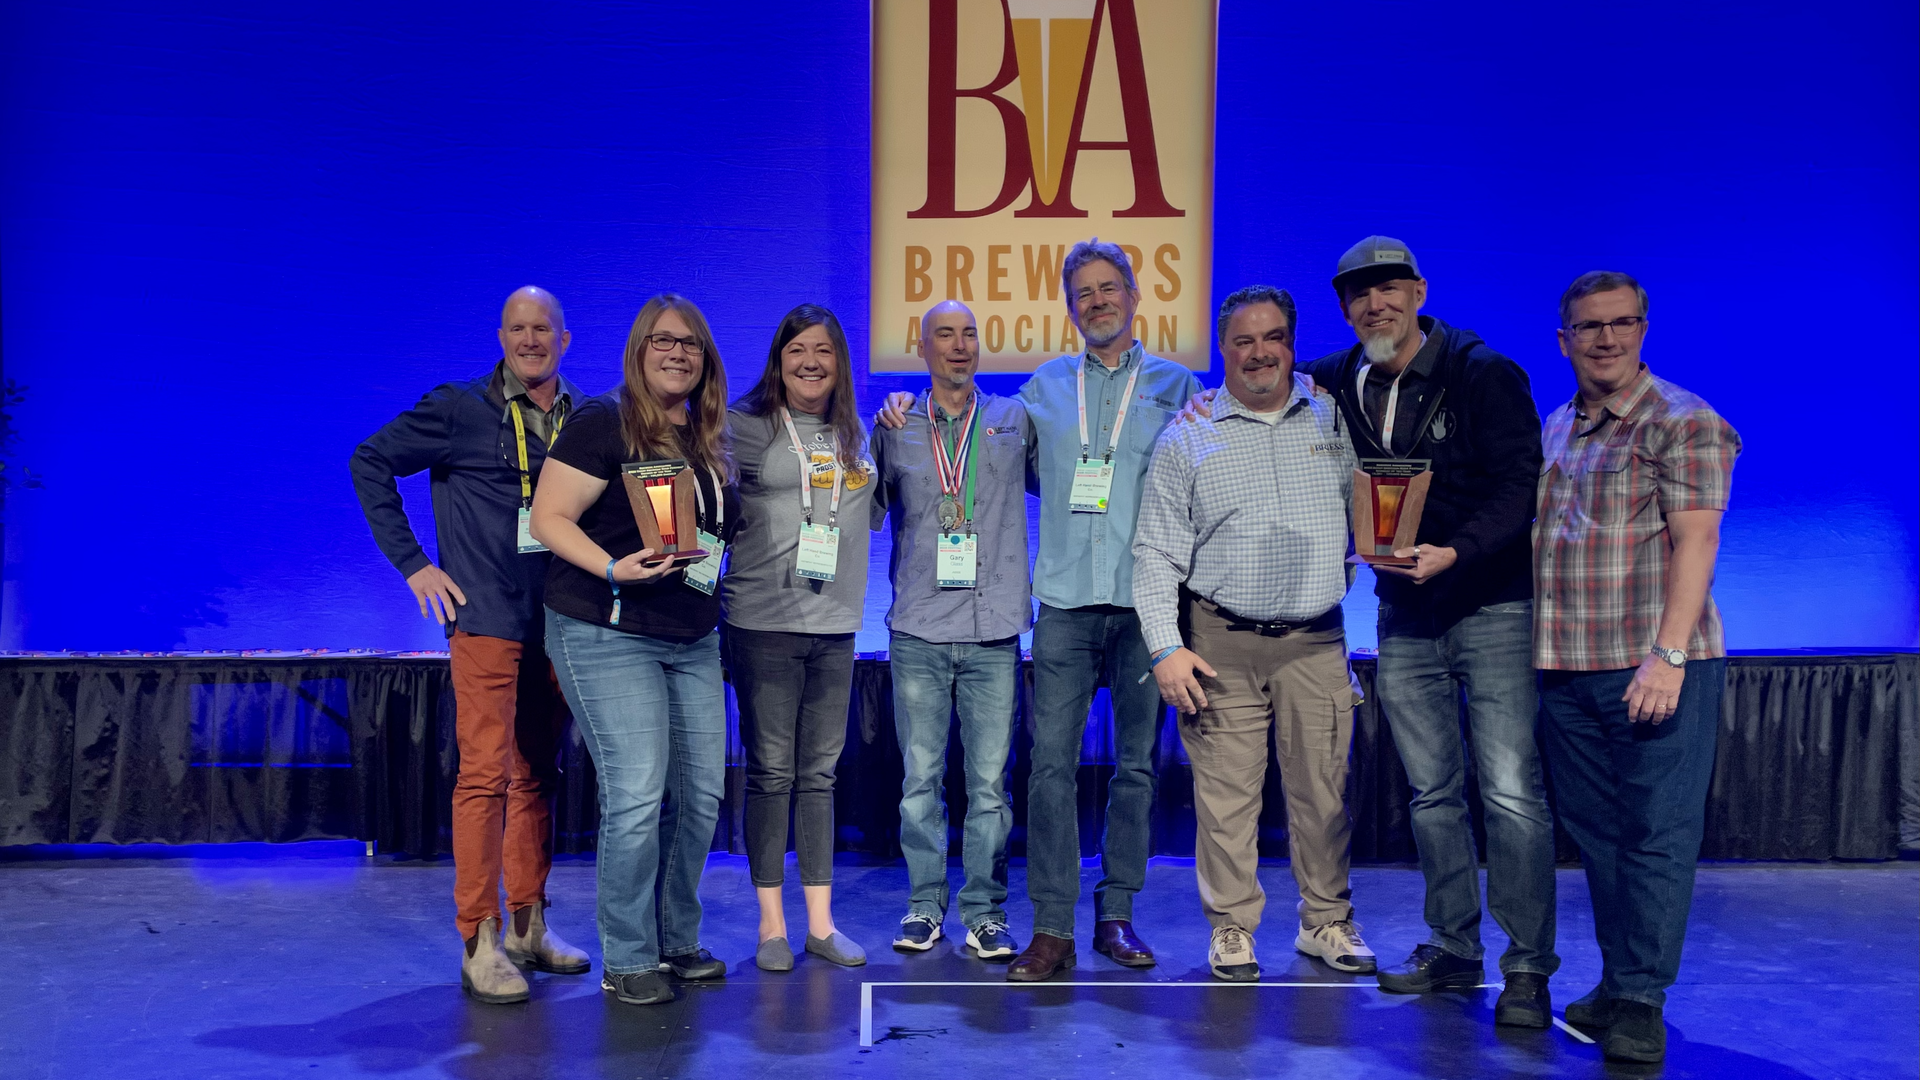 Left Hand Brewing's crew accepts a GABF medal on stage at the awards ceremony in Denver. Photo: John Frank/Axios